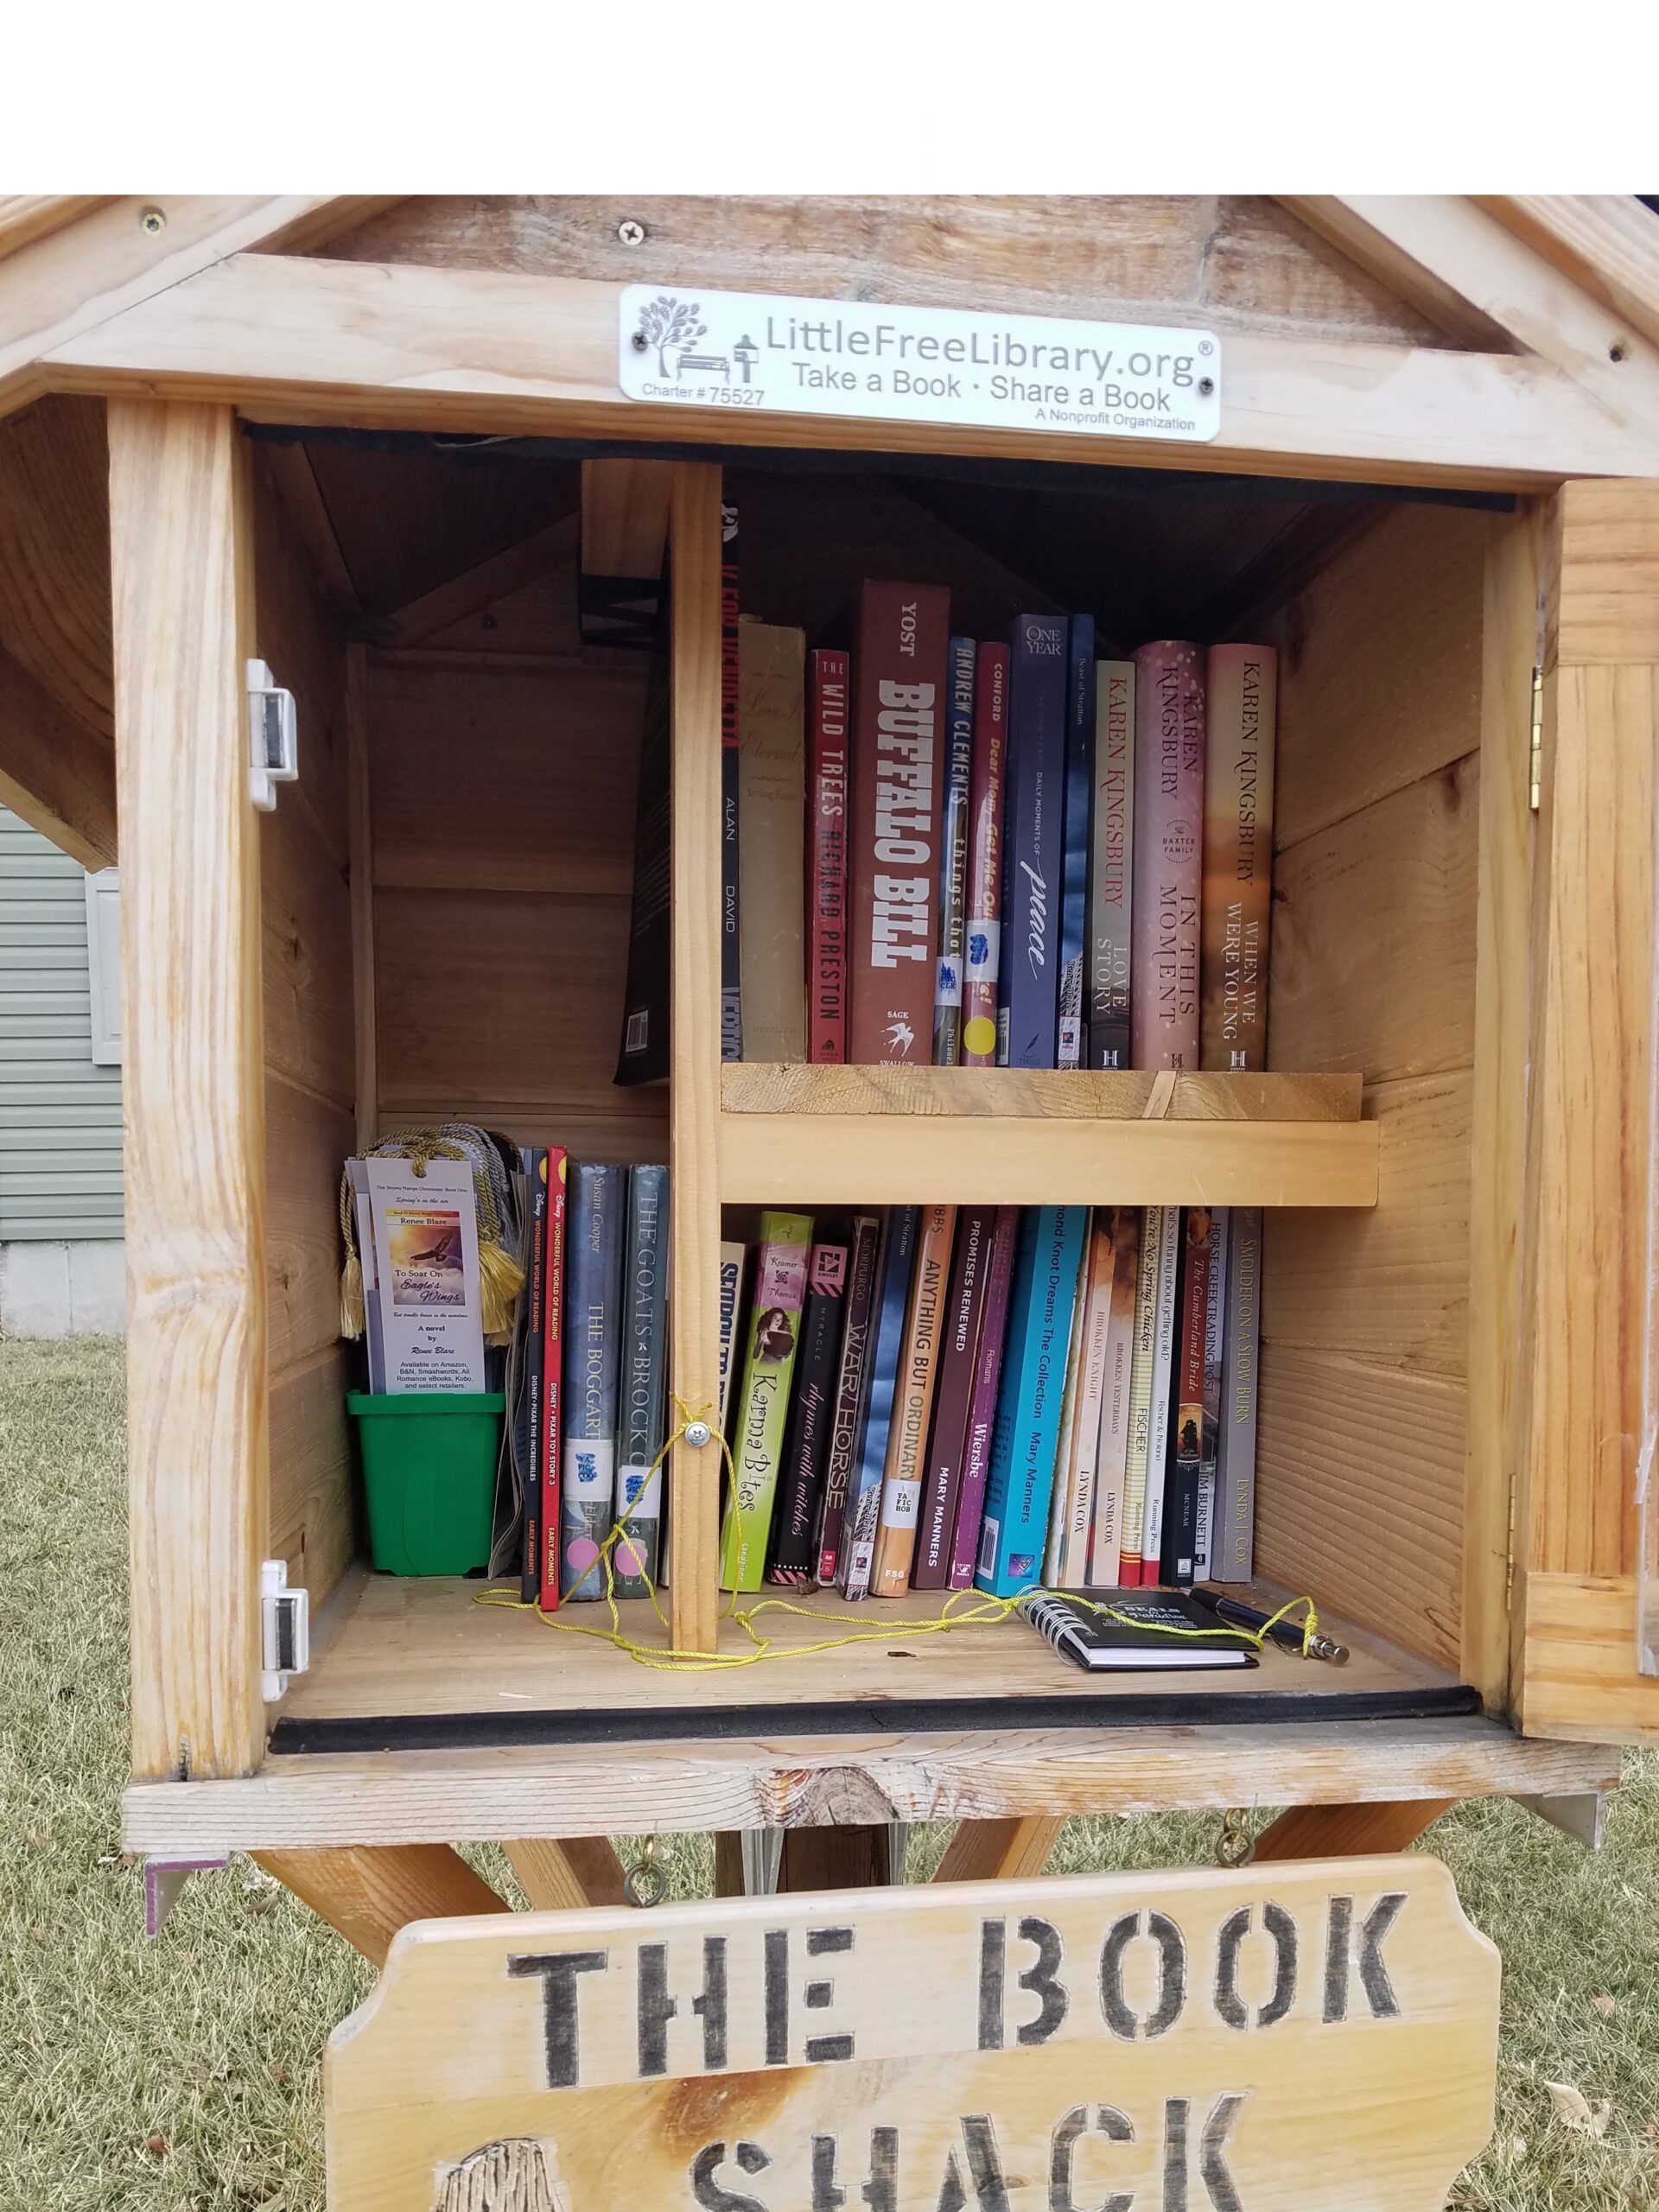 Little Free Library in Newcastle